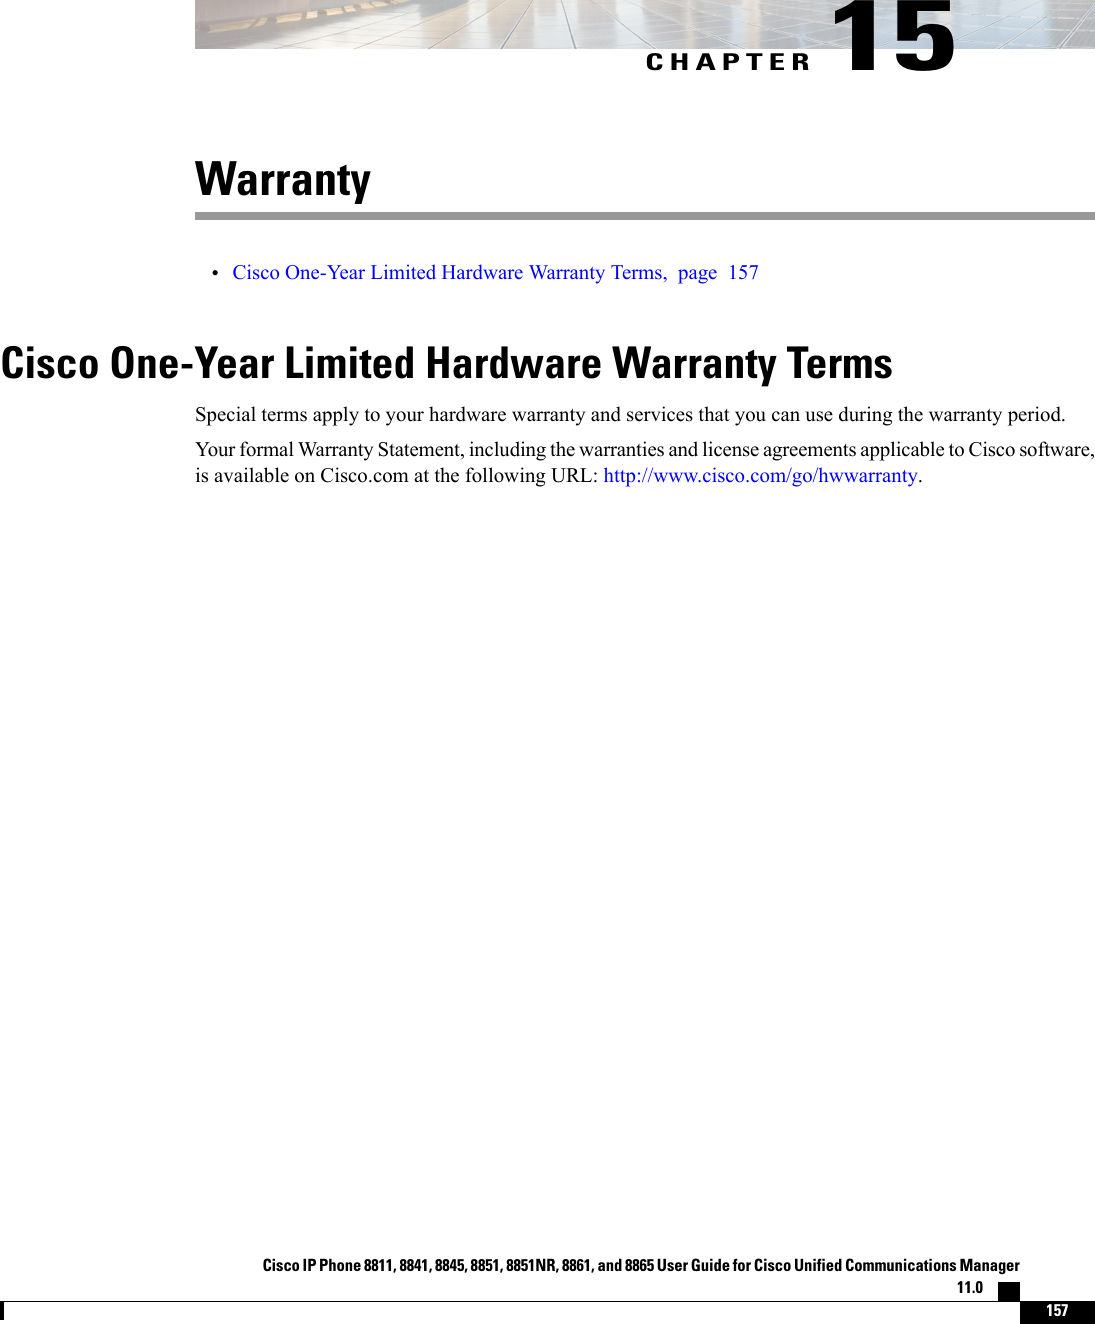 CHAPTER 15Warranty•Cisco One-Year Limited Hardware Warranty Terms, page 157Cisco One-Year Limited Hardware Warranty TermsSpecial terms apply to your hardware warranty and services that you can use during the warranty period.Your formal Warranty Statement, including the warranties and license agreements applicable to Cisco software,is available on Cisco.com at the following URL: http://www.cisco.com/go/hwwarranty.Cisco IP Phone 8811, 8841, 8845, 8851, 8851NR, 8861, and 8865 User Guide for Cisco Unified Communications Manager11.0    157